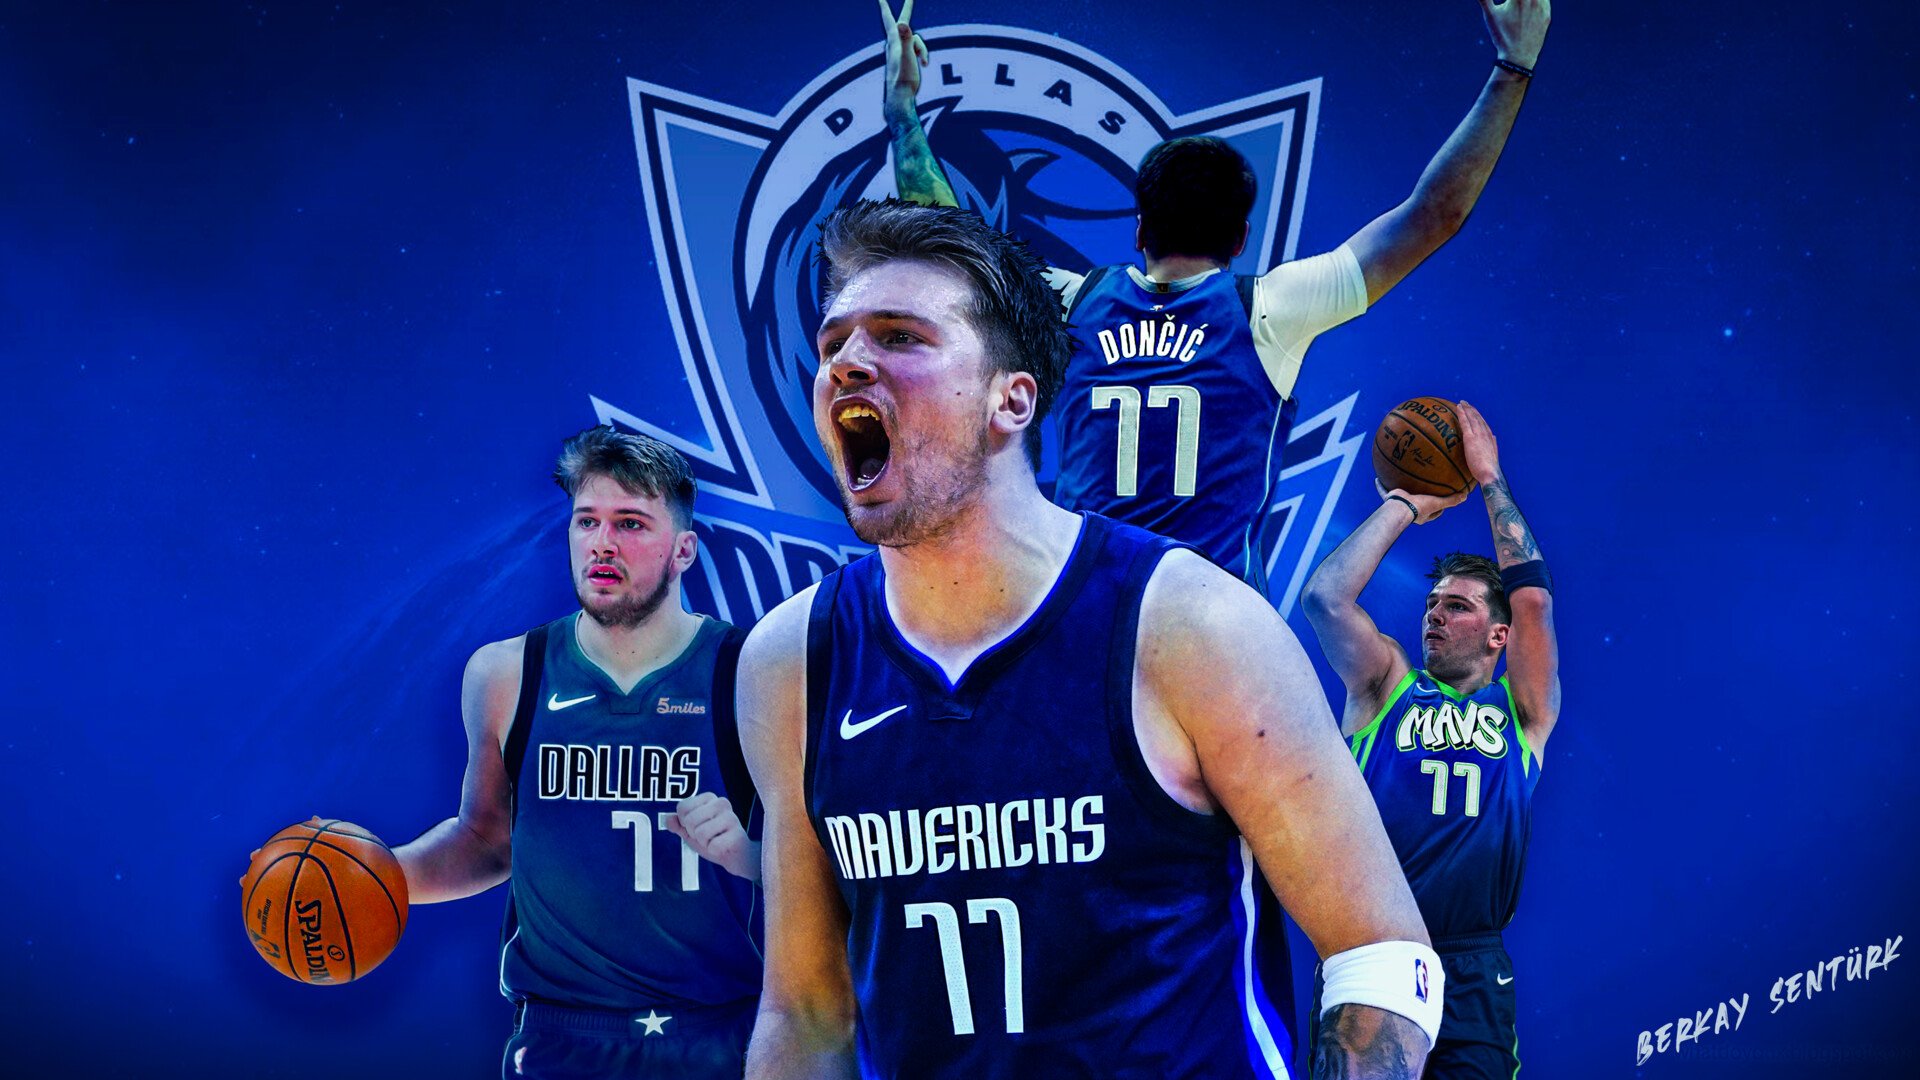 Luka Doncic Nba Live HD Sports 4k Wallpapers Images Backgrounds Photos  and Pictures